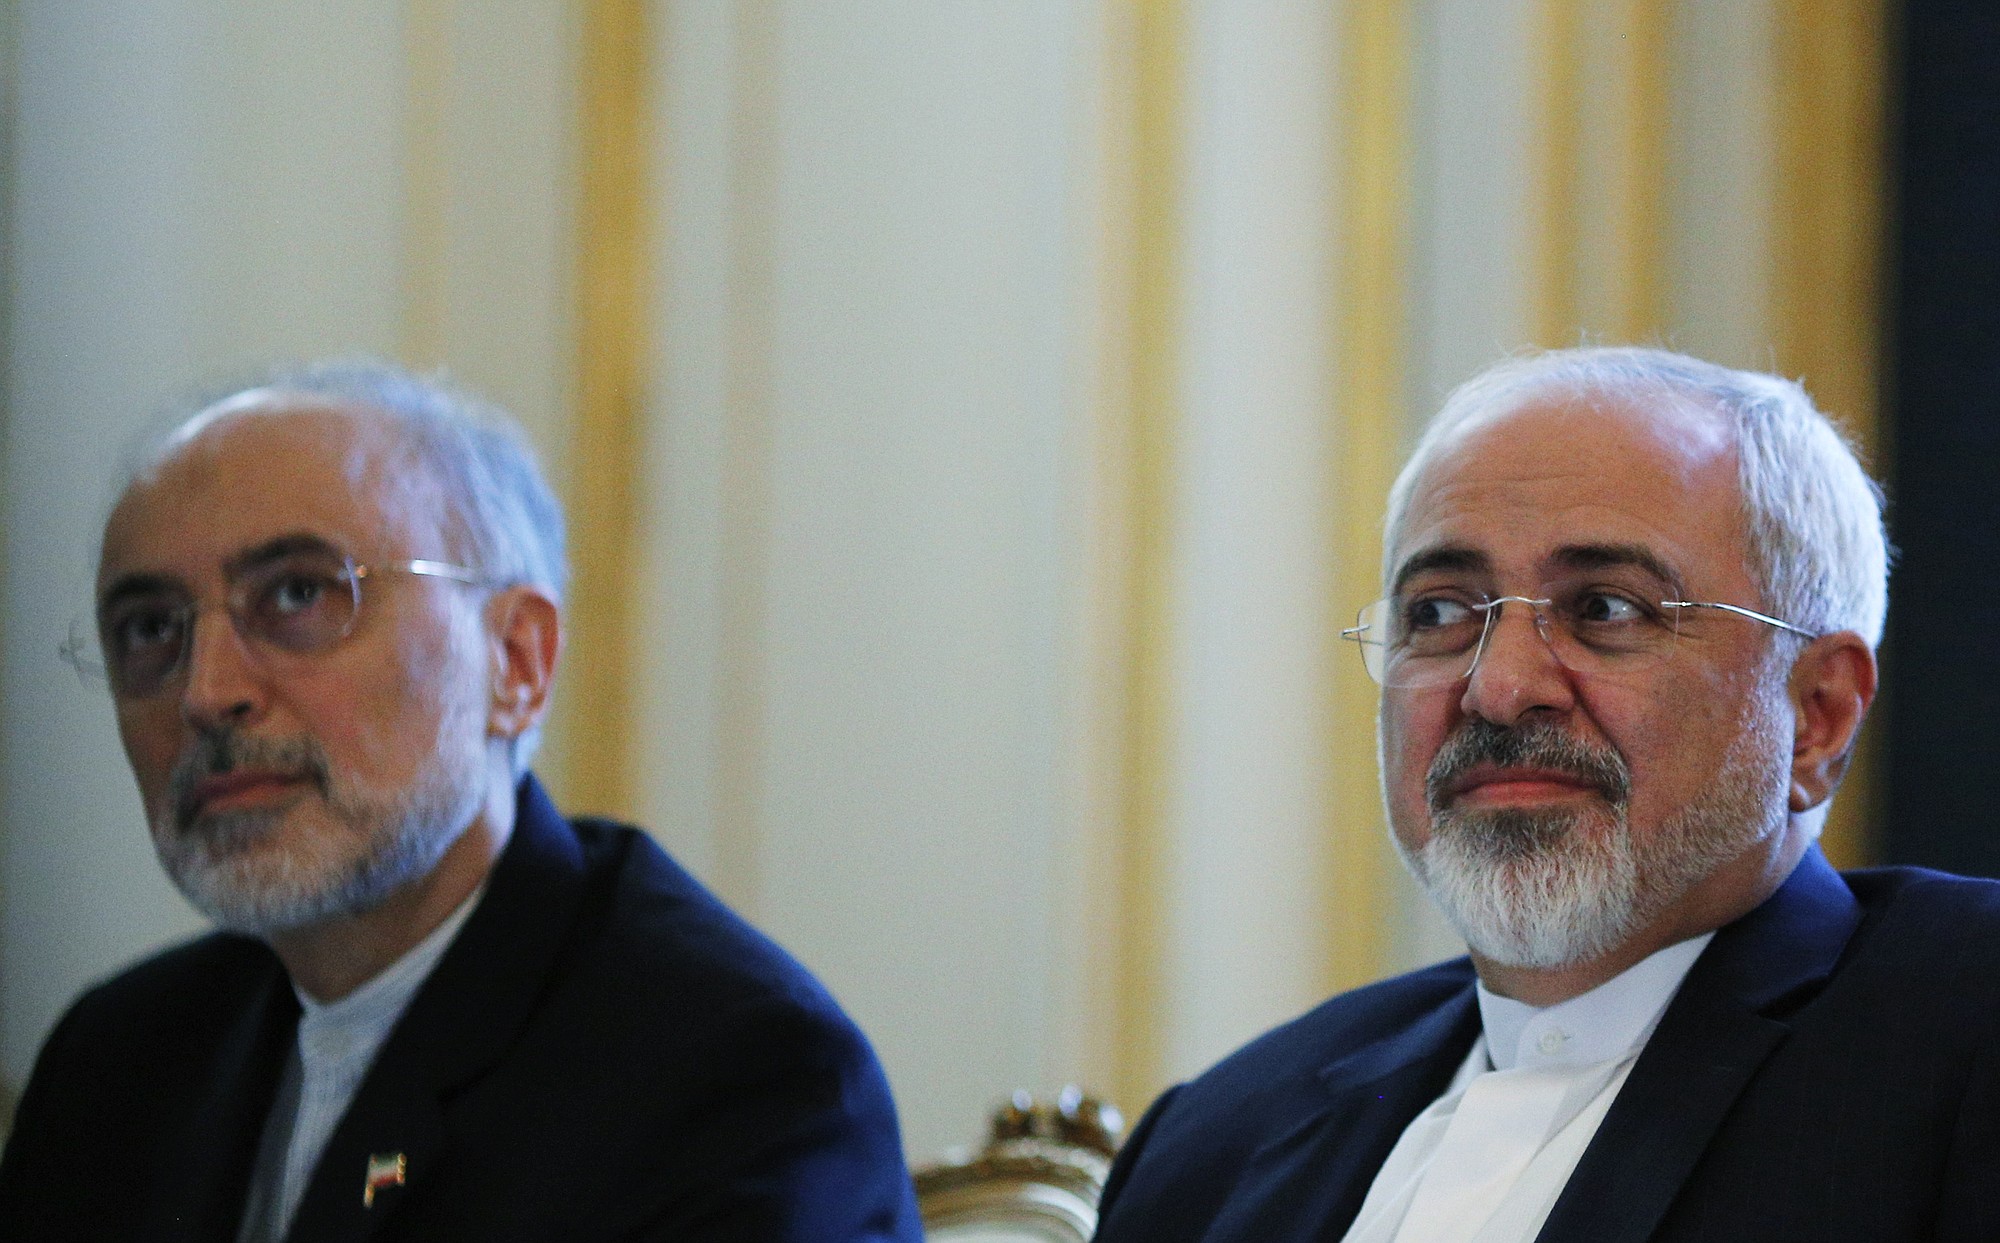 Mohammad Javad Zarif, Iran's foreign minister